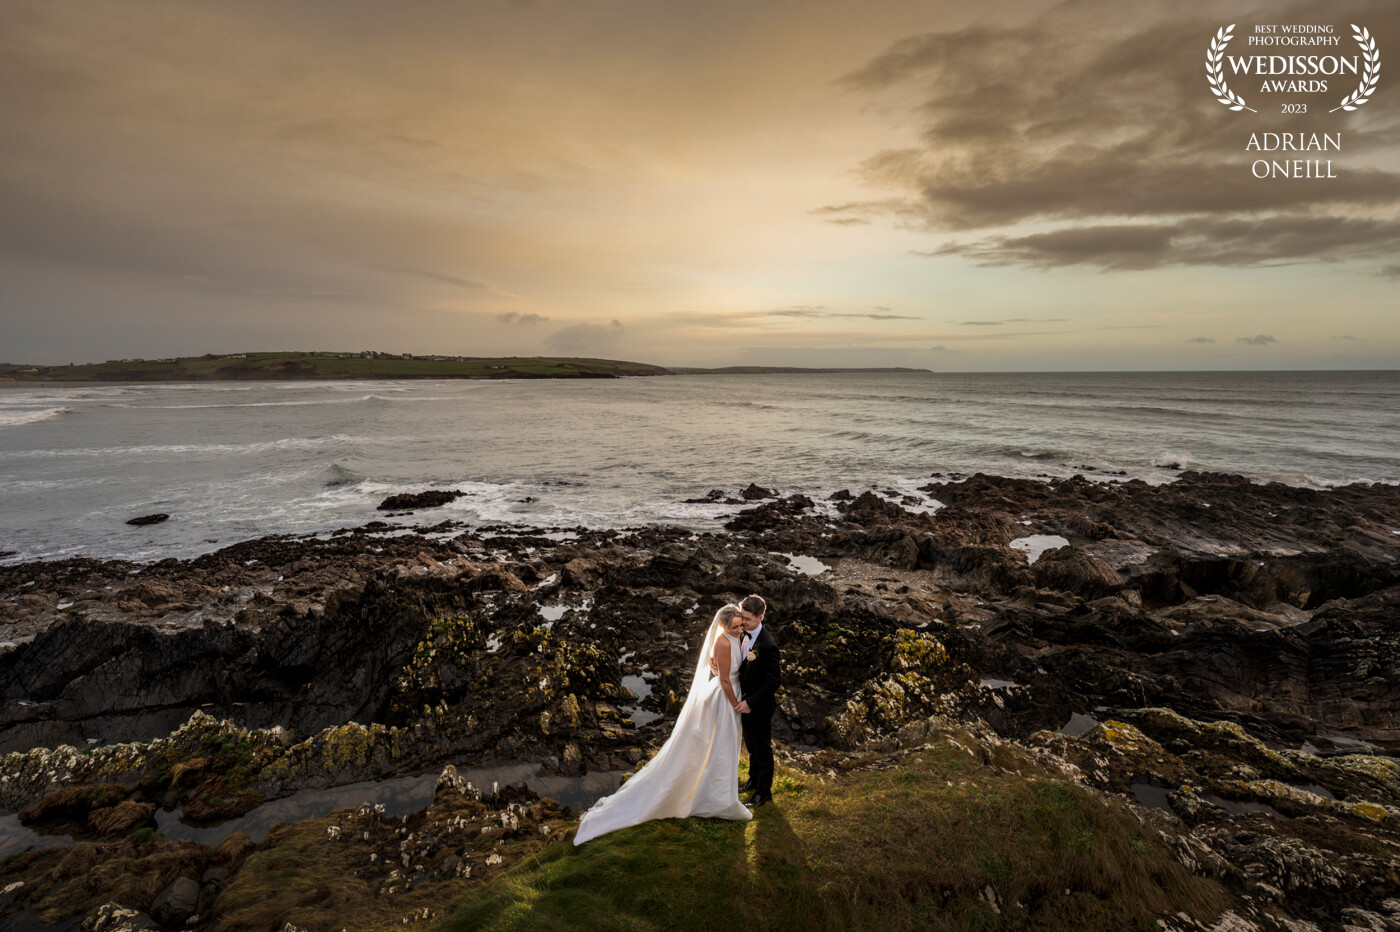 What a way to end the Photoshoot, the sky was turning a lovely colour and the light was fading quickly. I managed to get this seconds before we headed back into the reception! This couple were absolutely brilliant. This shot was taken just right across the road from the hotel. The Dunmore Hotel in Co. Cork is the most amazing venue.